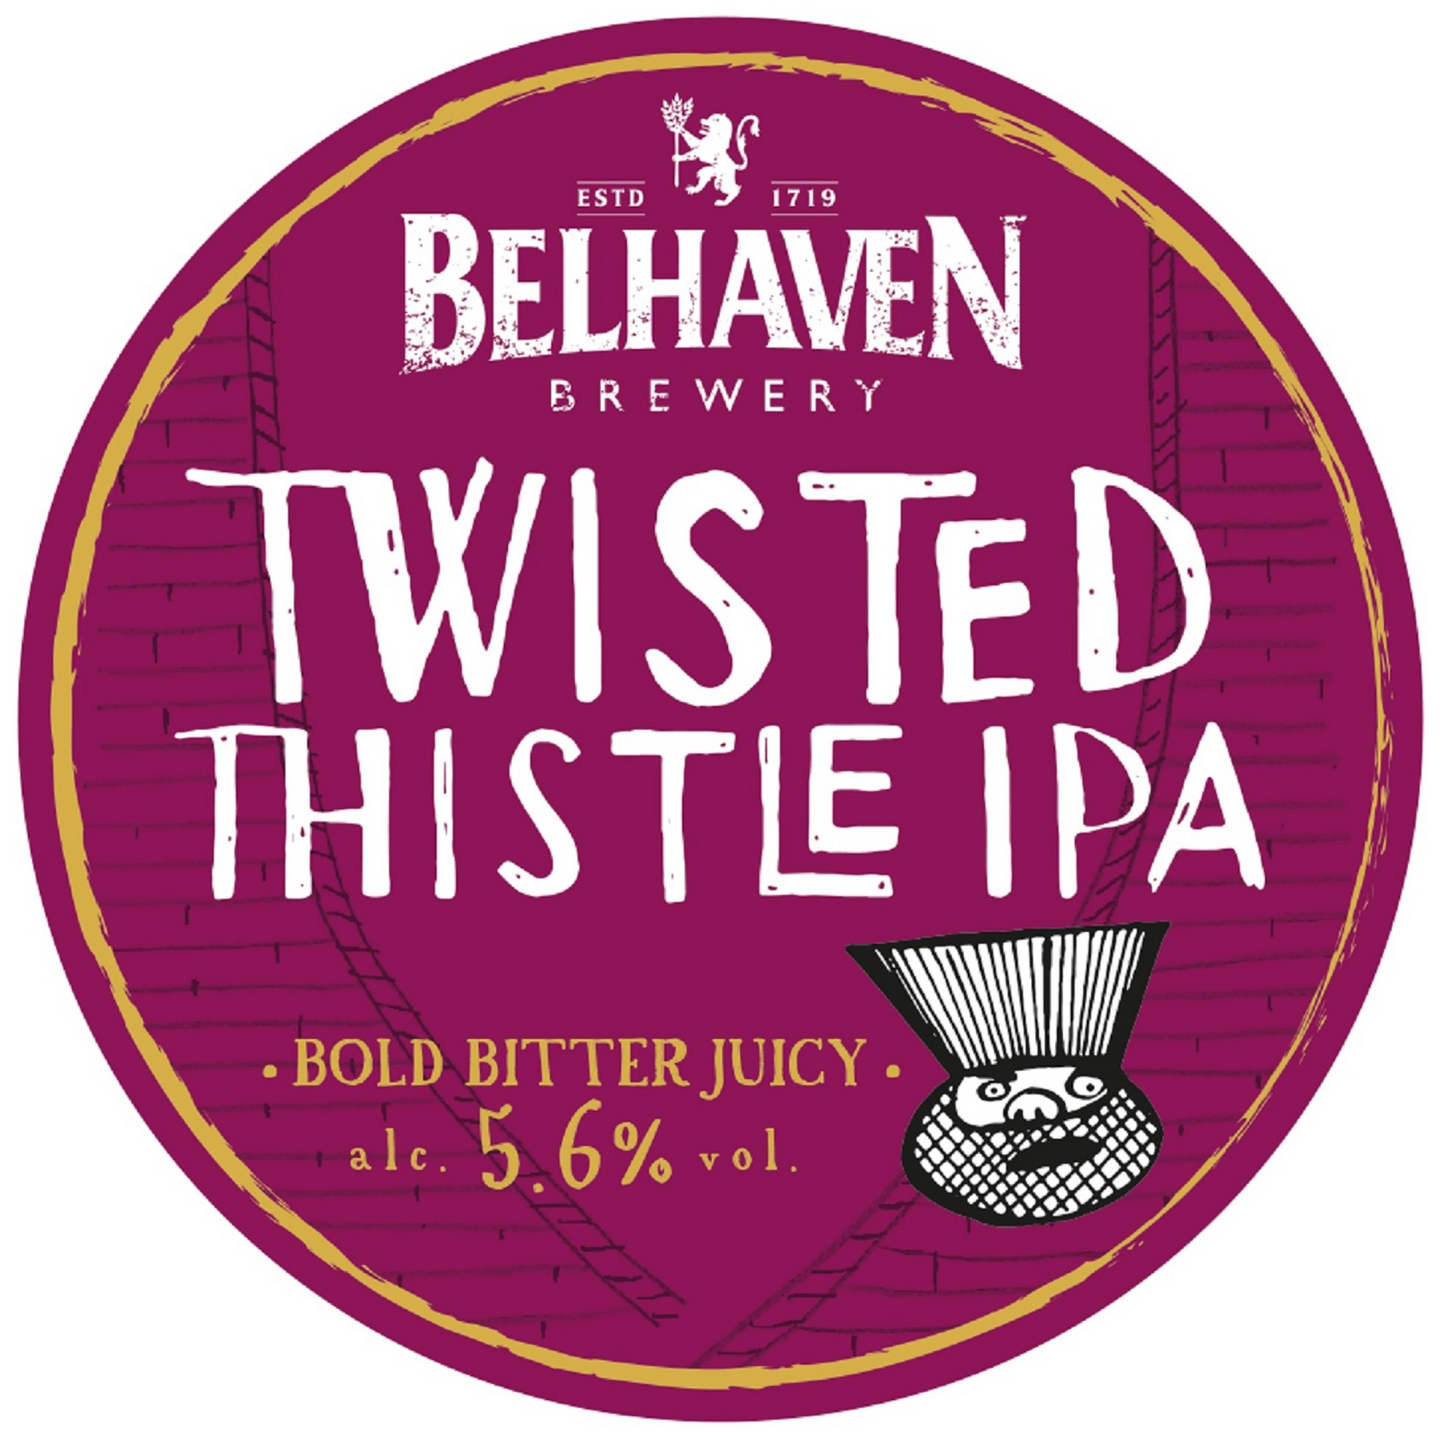 Belhaven Twisted Thistle 5,6% 30l astia